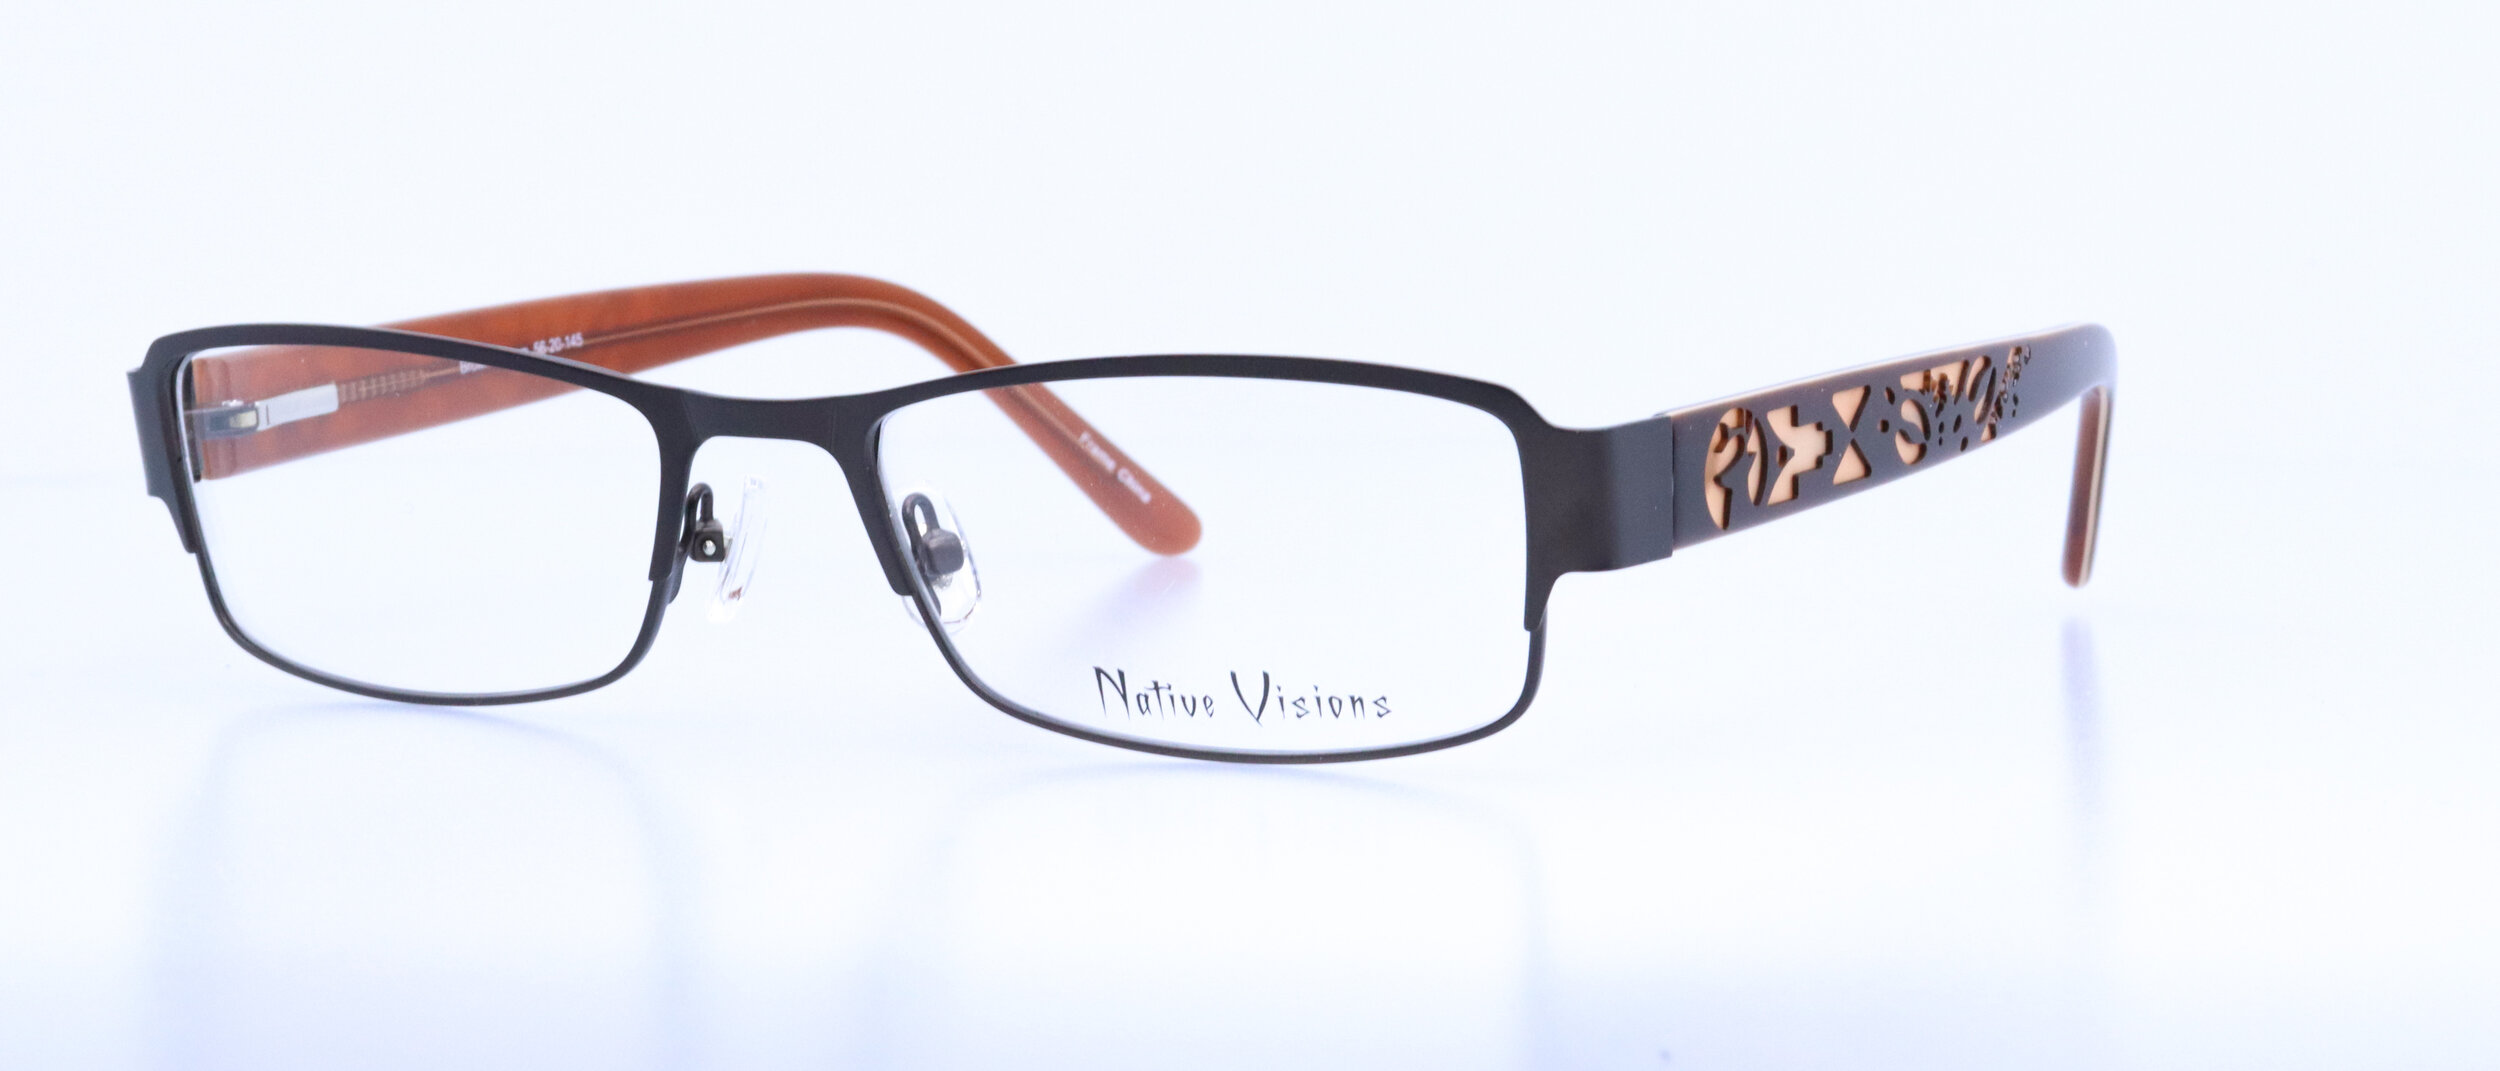  Deer by Virgil "Smoker" Marchand: 56-20-145, Available in Brown/Cream, Black/Blue, or Olive Green 